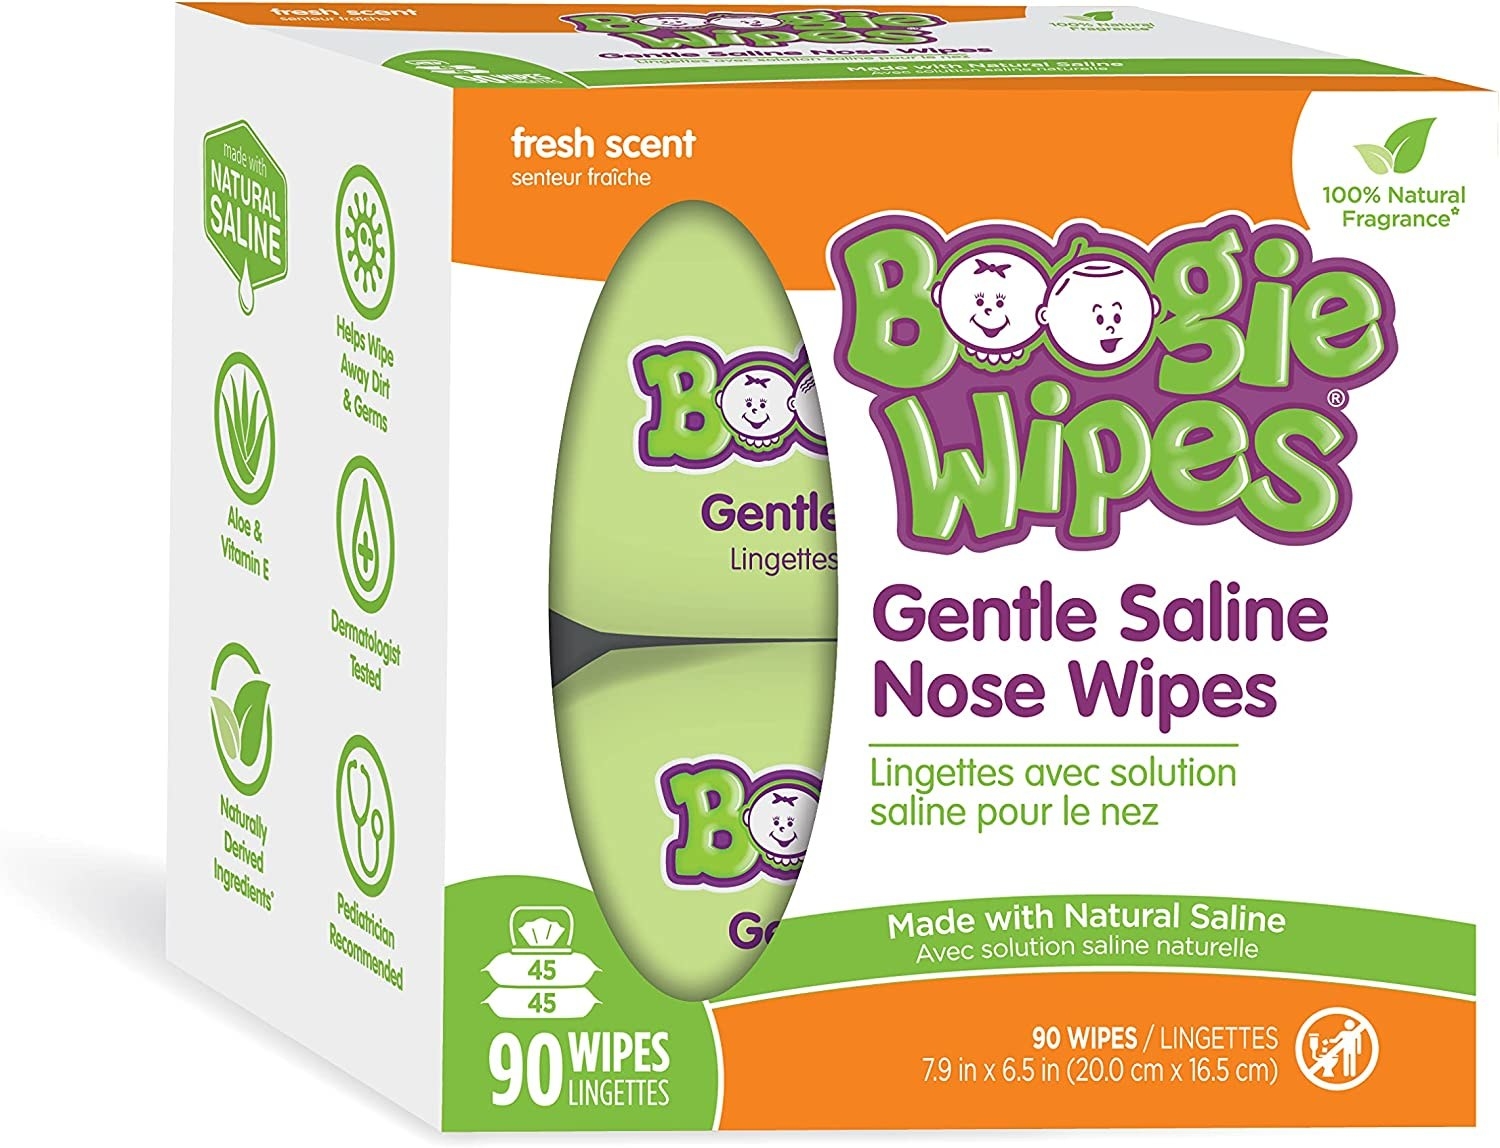 A box of Boogie Wipes on a blank background